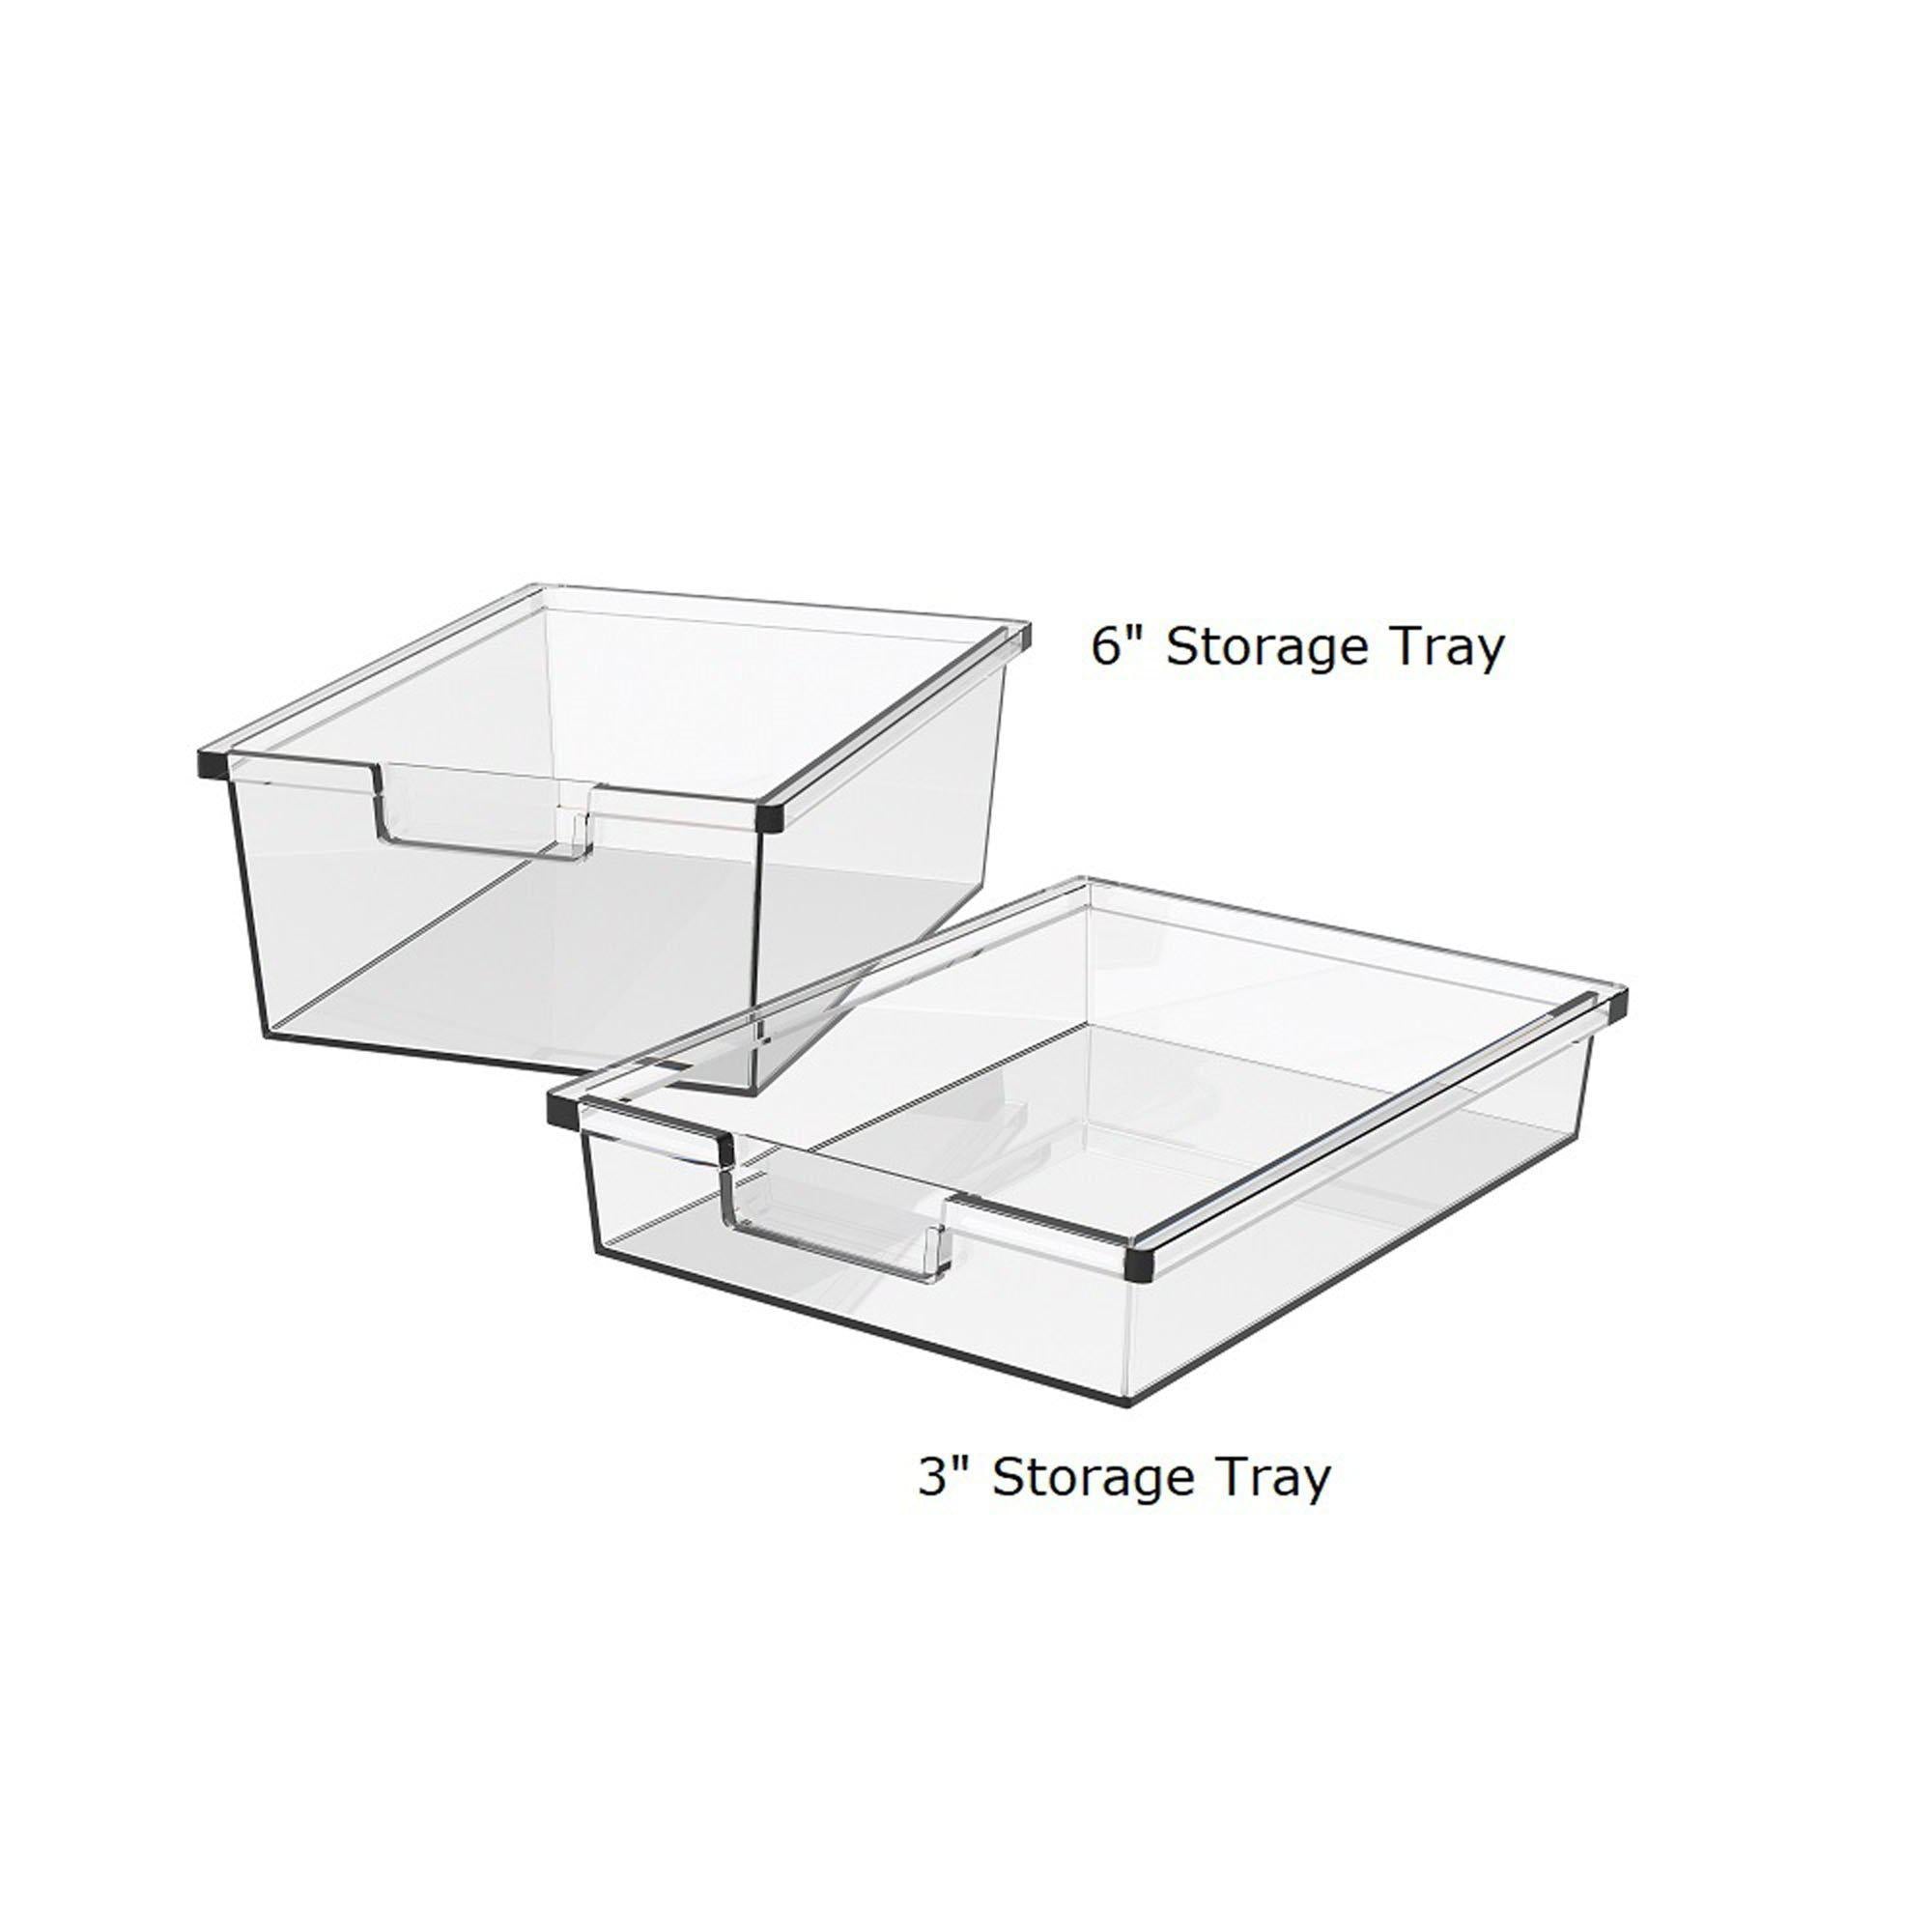 Storage Trays for Makerspace Mobile Storage Carts-Storage Cabinets & Shelving-